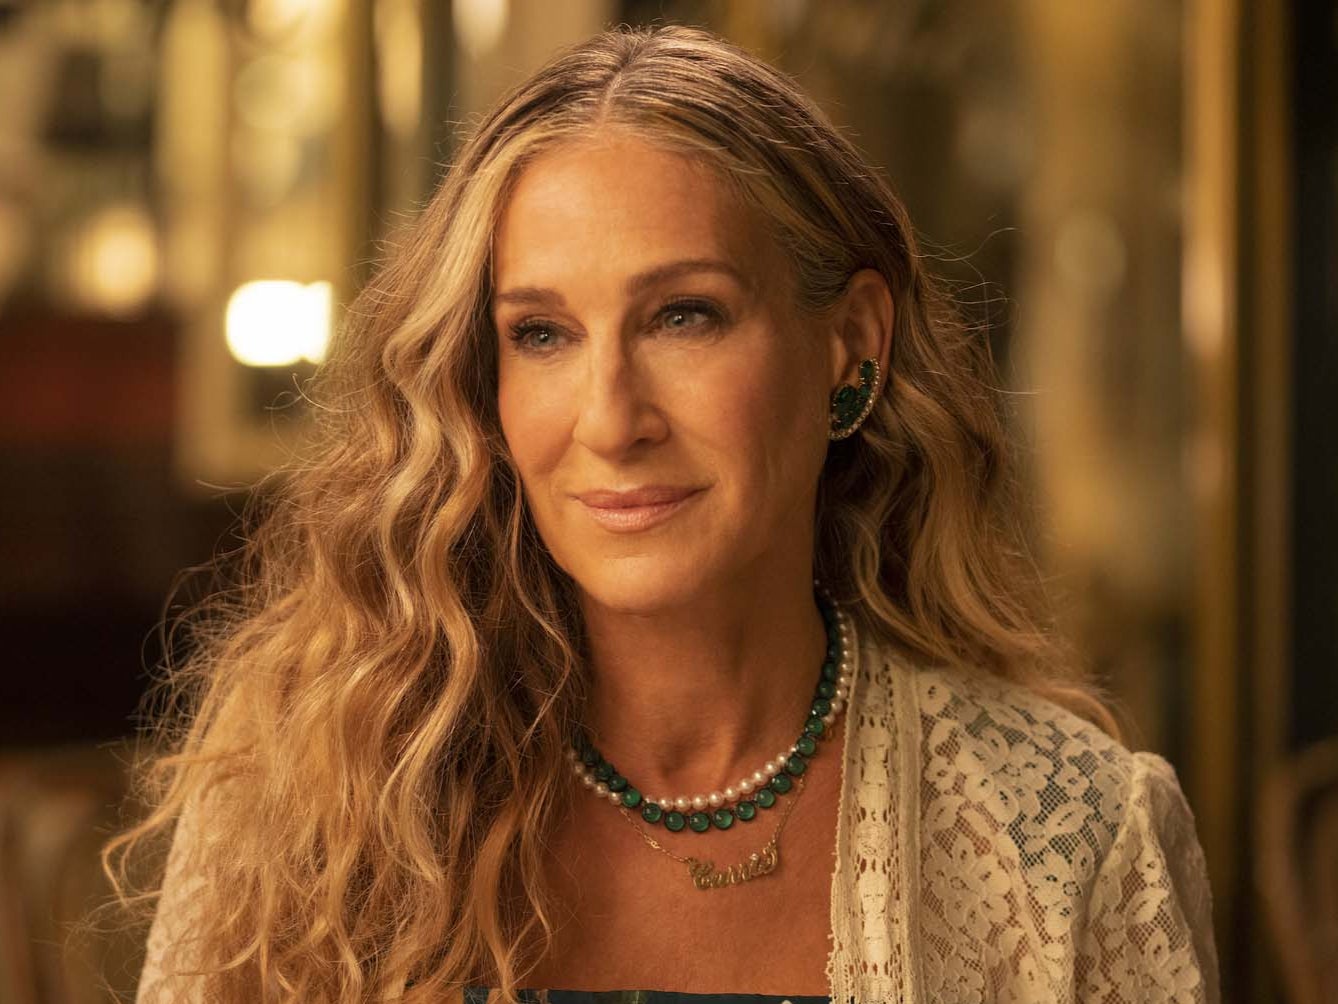 Sarah Jessica Parker as Carrie Bradshaw in ‘And Just Like That’